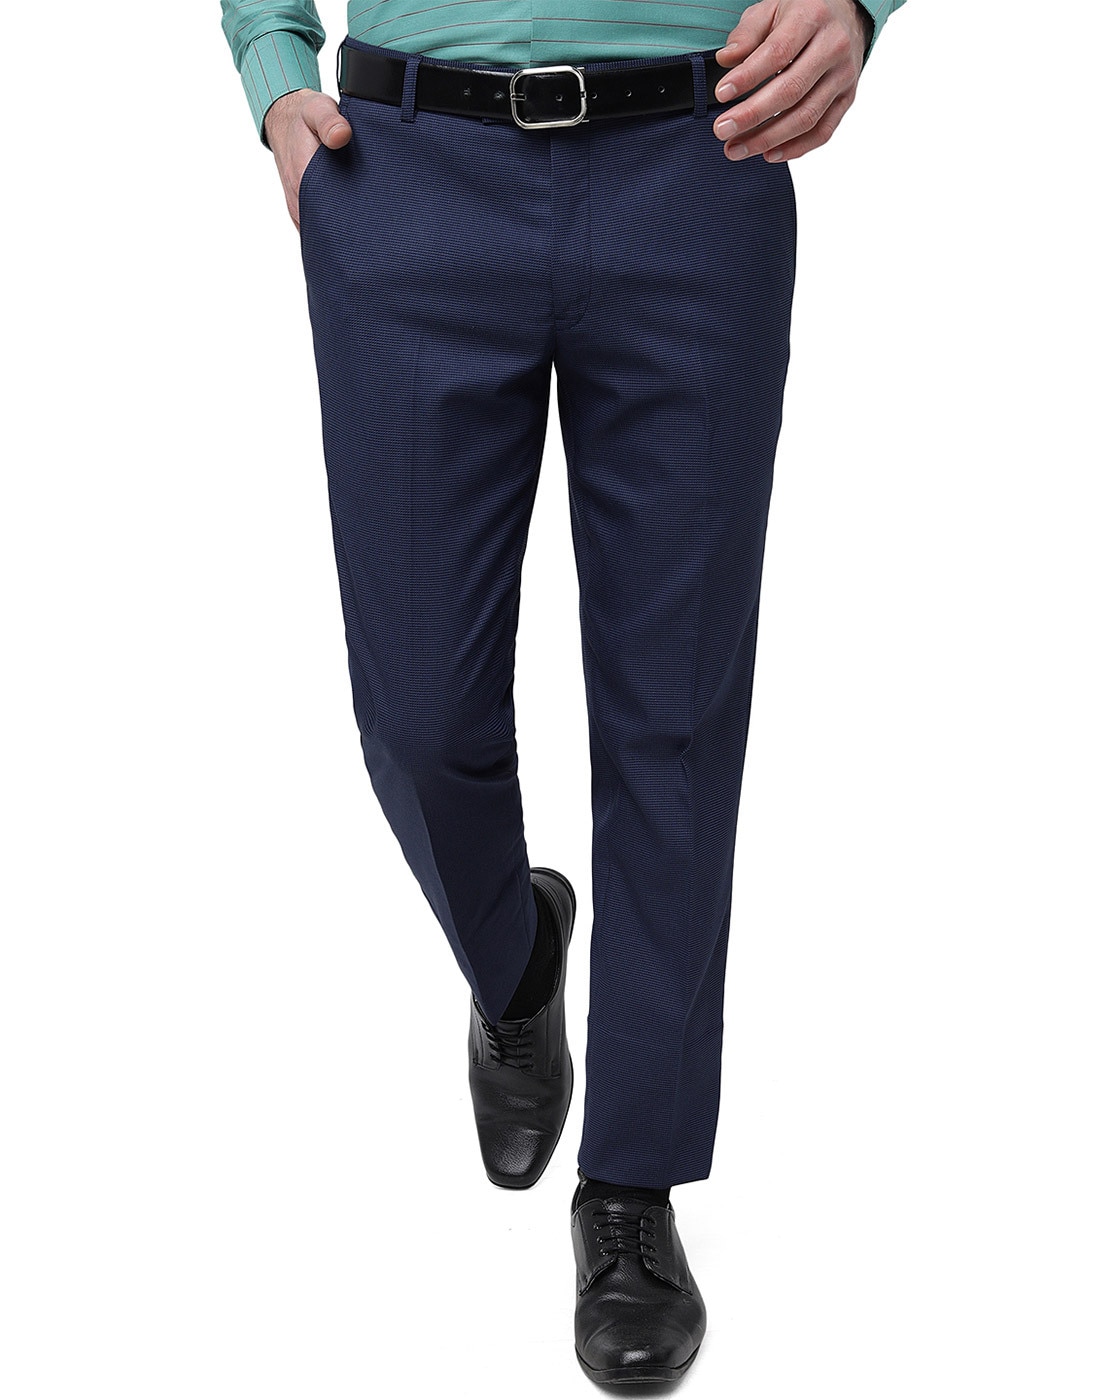 Buy LIGHTGREY Trousers & Pants for Men by Haul Chic Online | Ajio.com